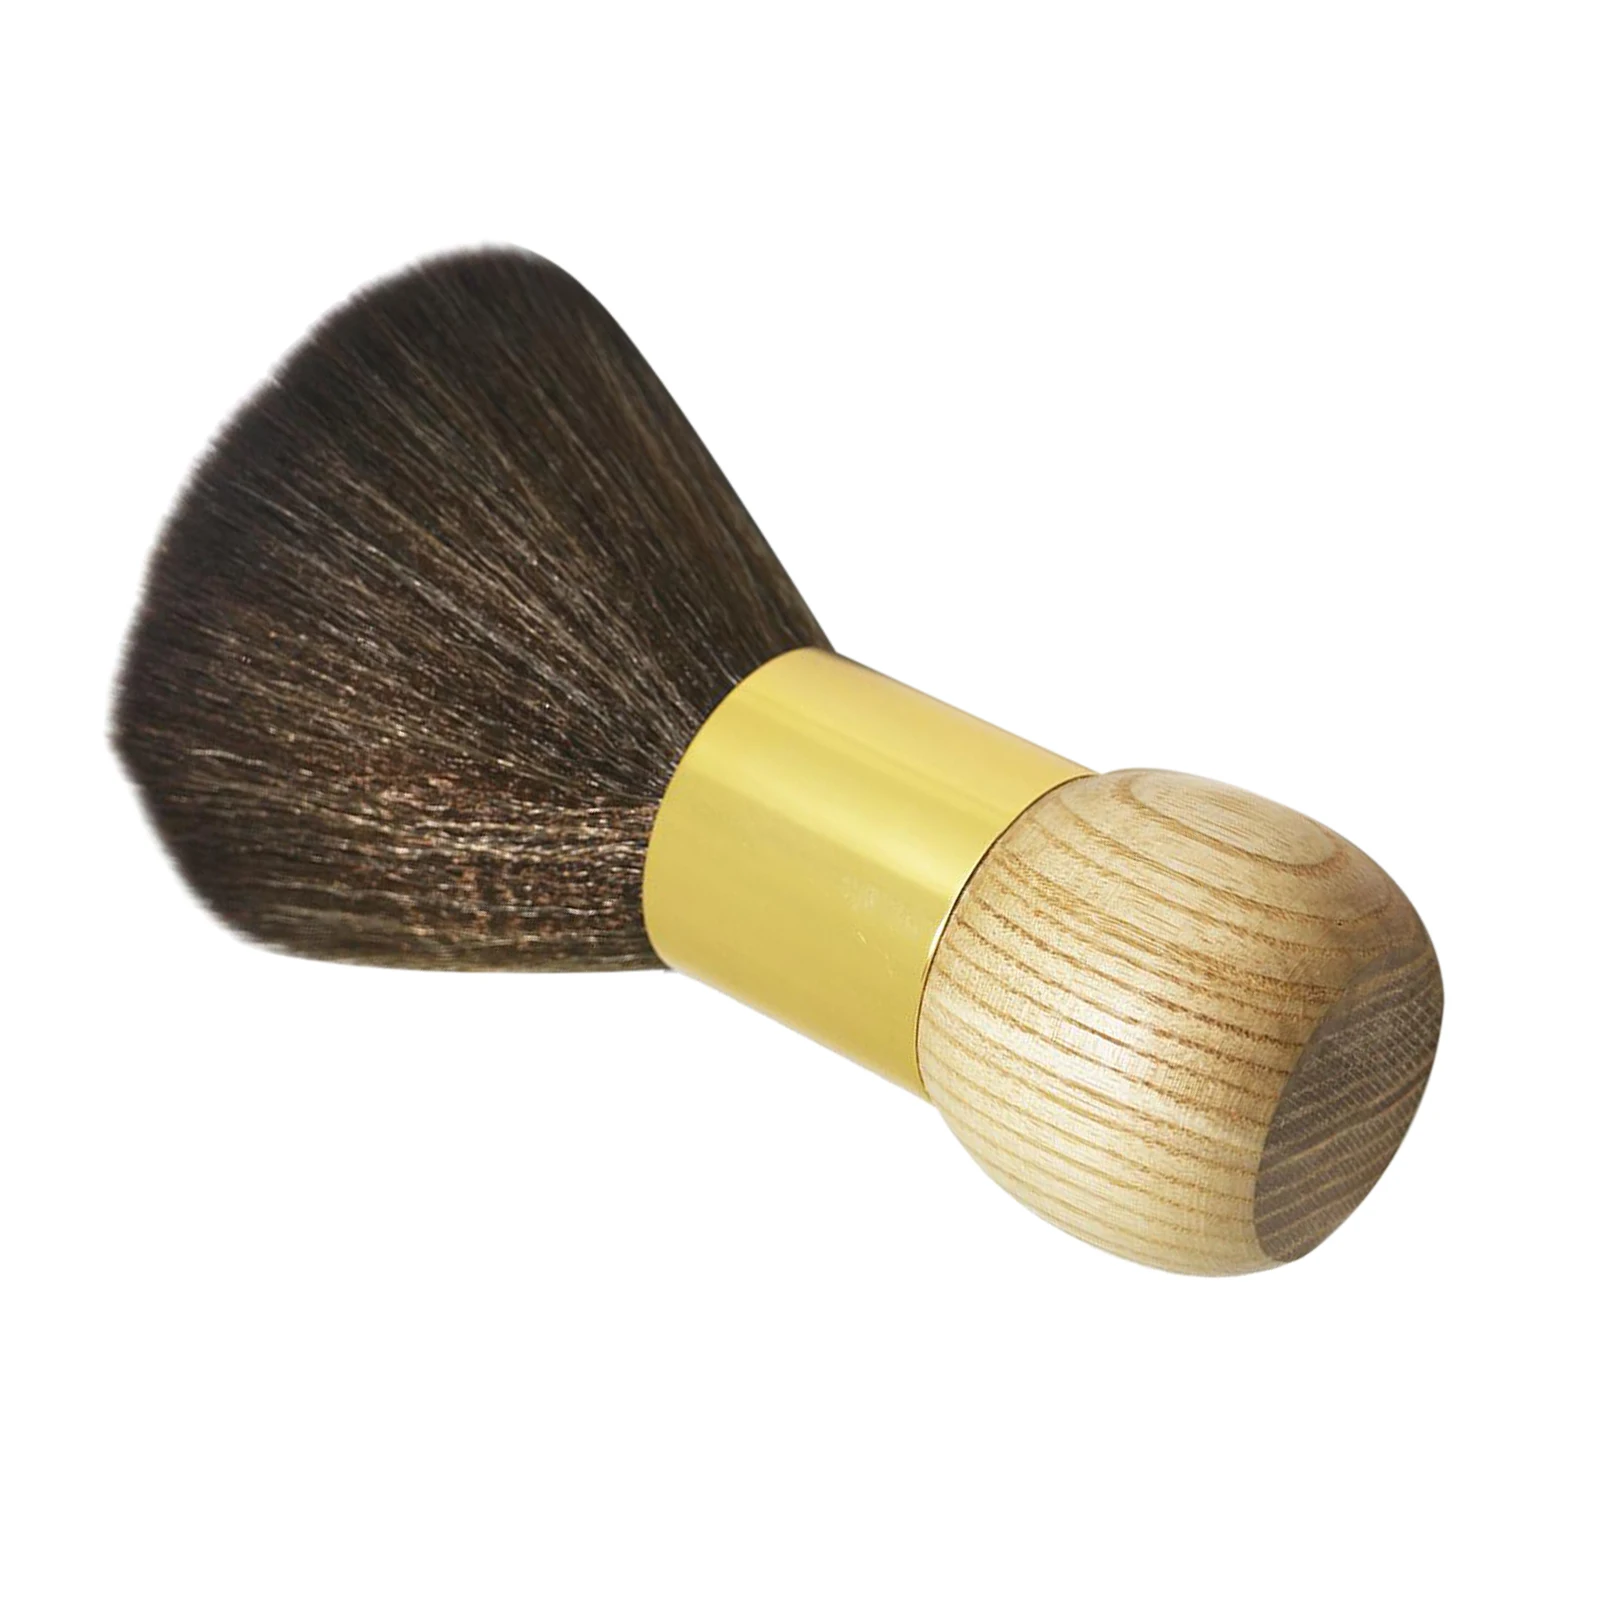 Handle Fiber Hair Wooden Hairbrush for Salon Barber Styling Tool Remove Hair Clippings Neckline and Ears After Haircut